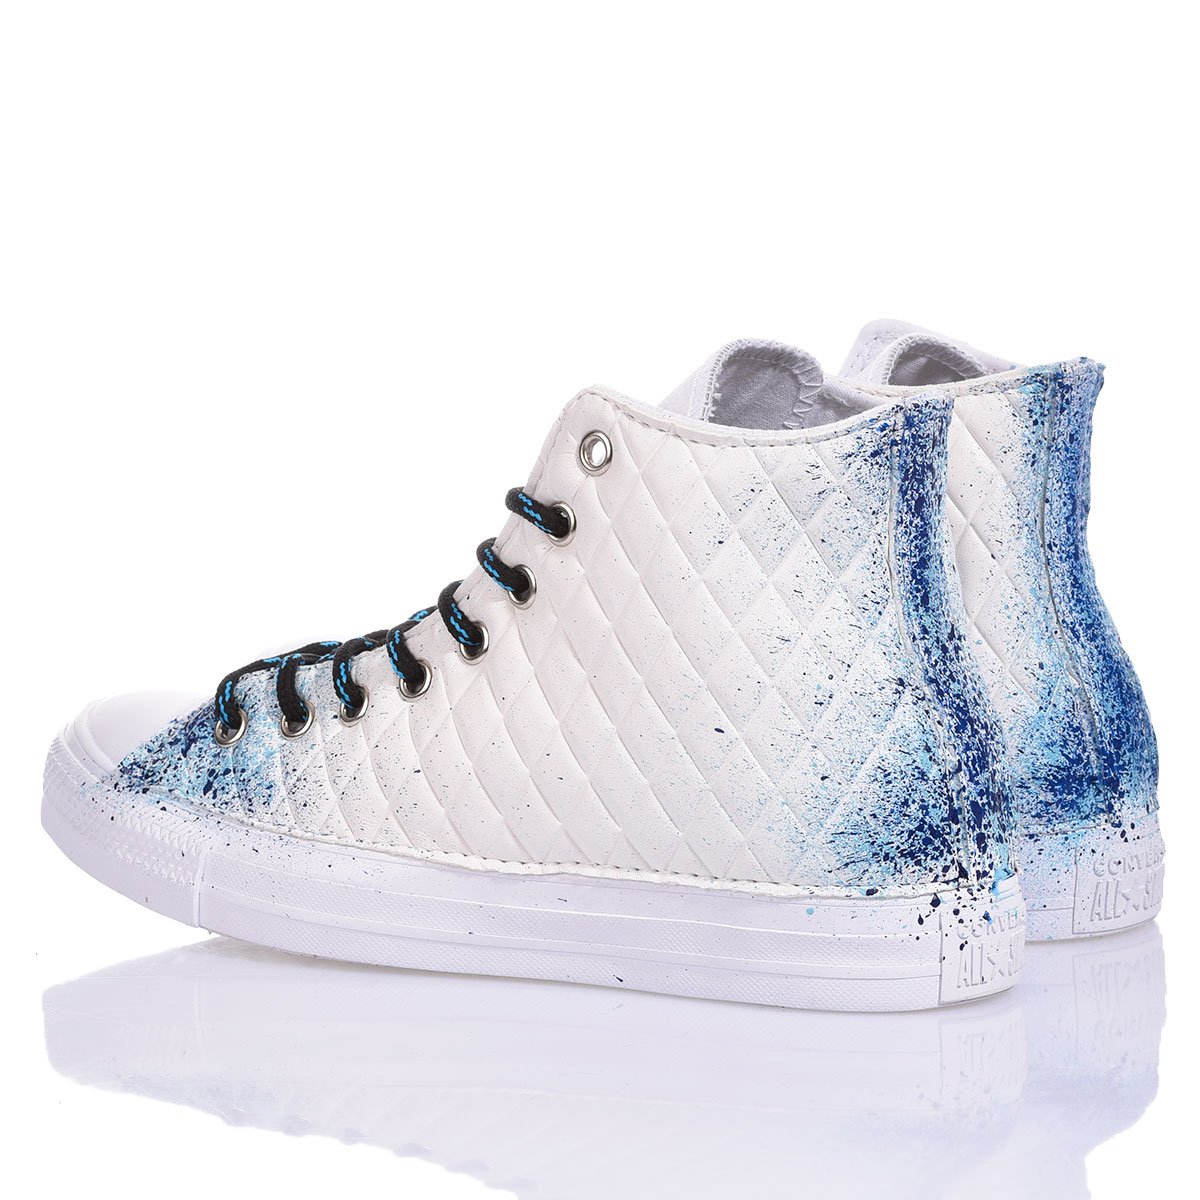 Converse White Quilt Chuck Taylor Hi Special